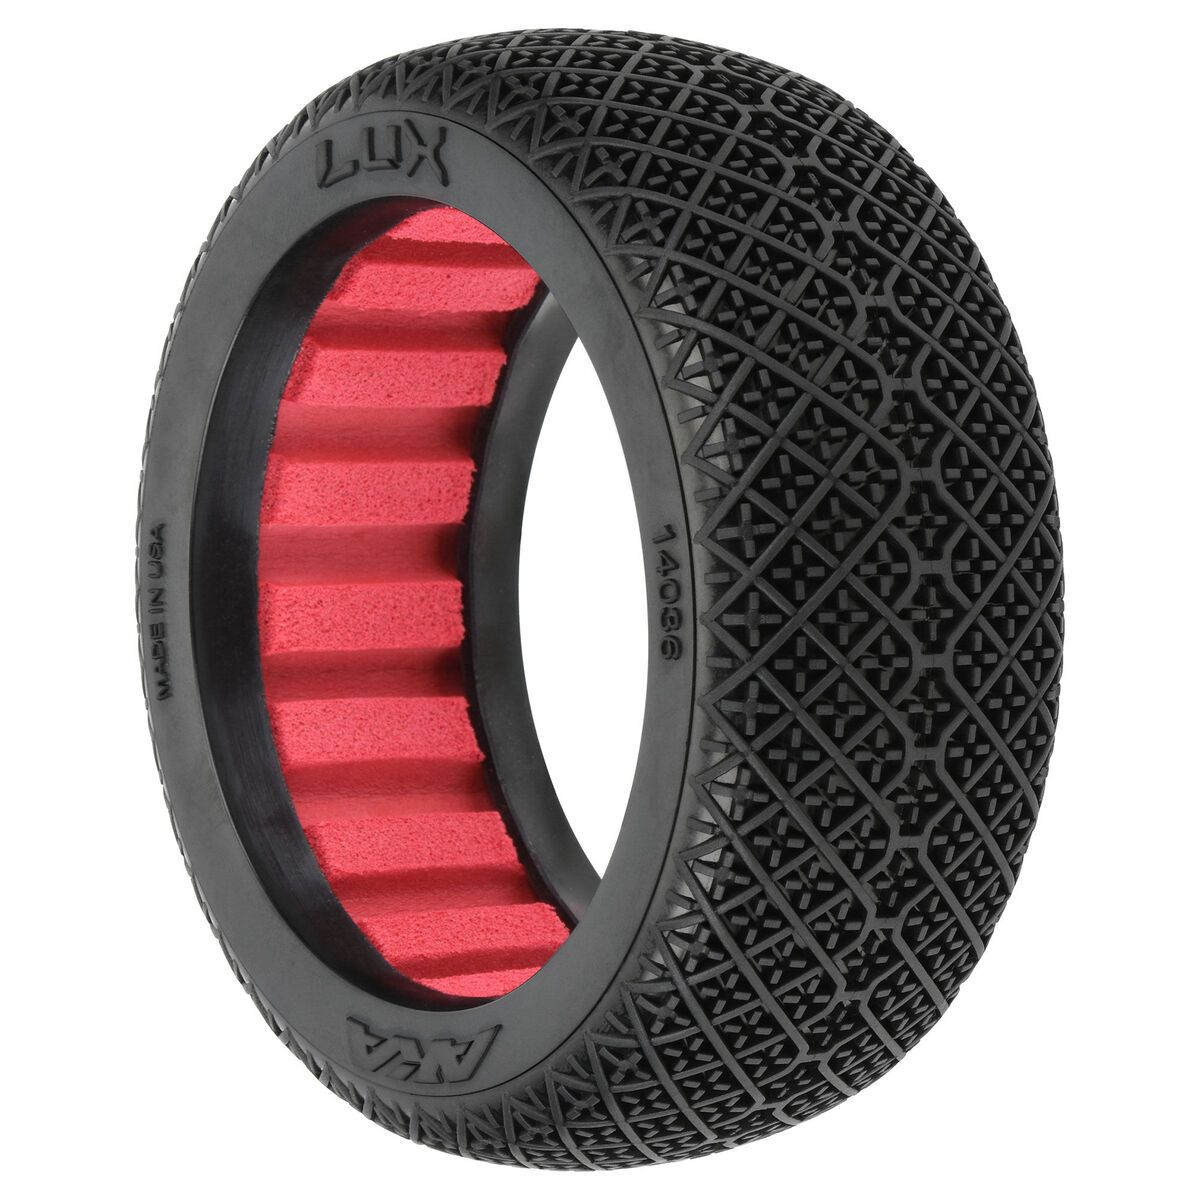 AKA Products, Inc. 14036SR 1:8 Lux S Front/Rear Off-Road Buggy Tires (Pack of 2)